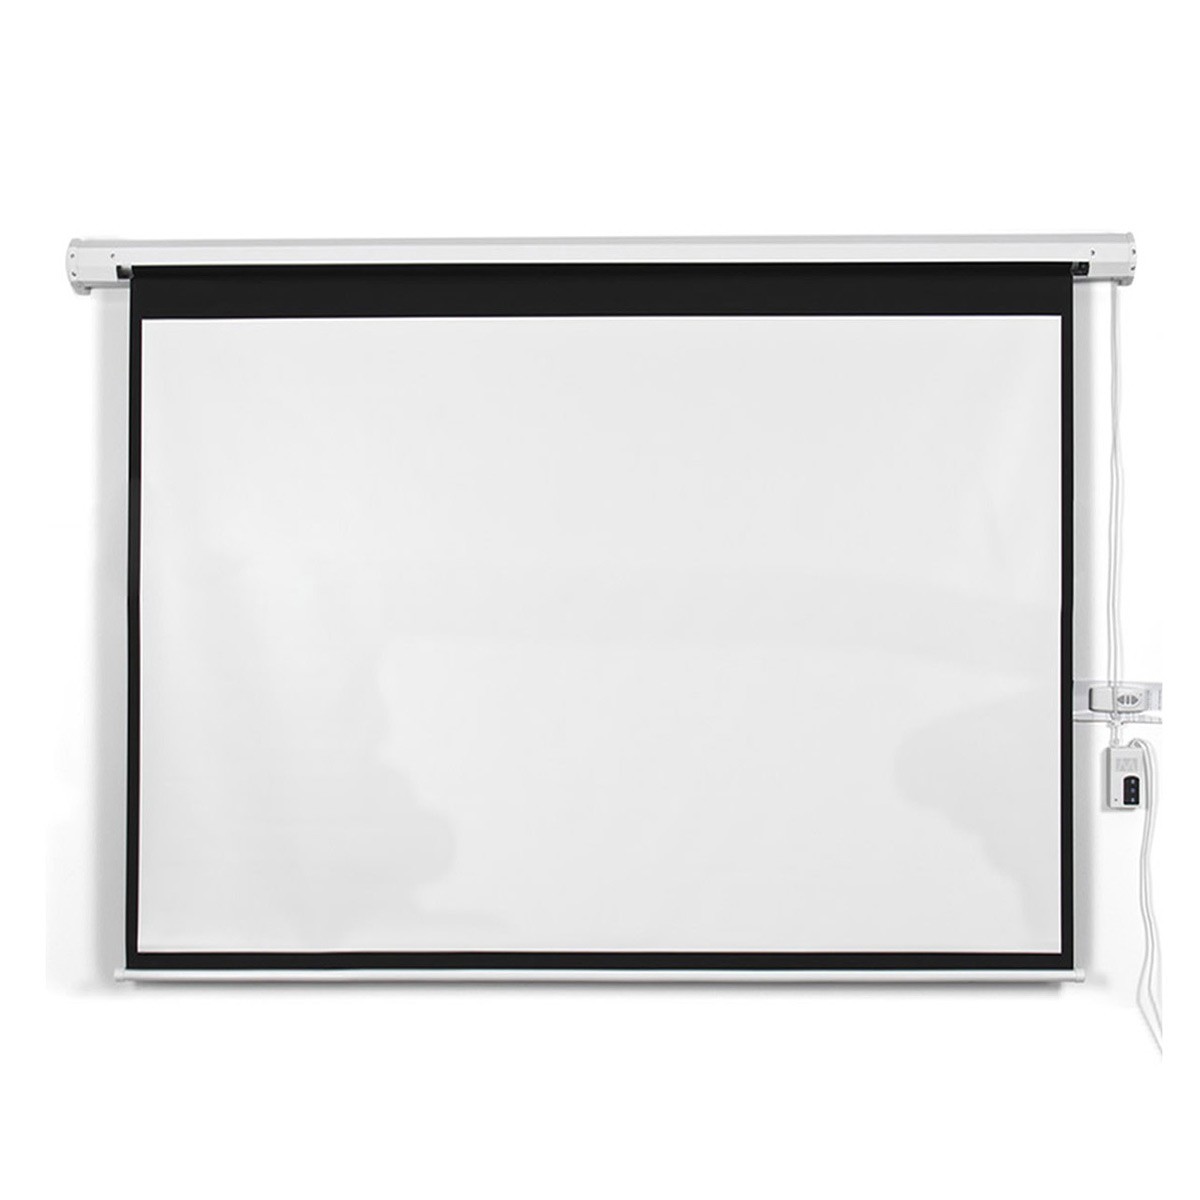 New 100 In. 16:9 HD Foldable Electric Motorized Projector Screen + Remote